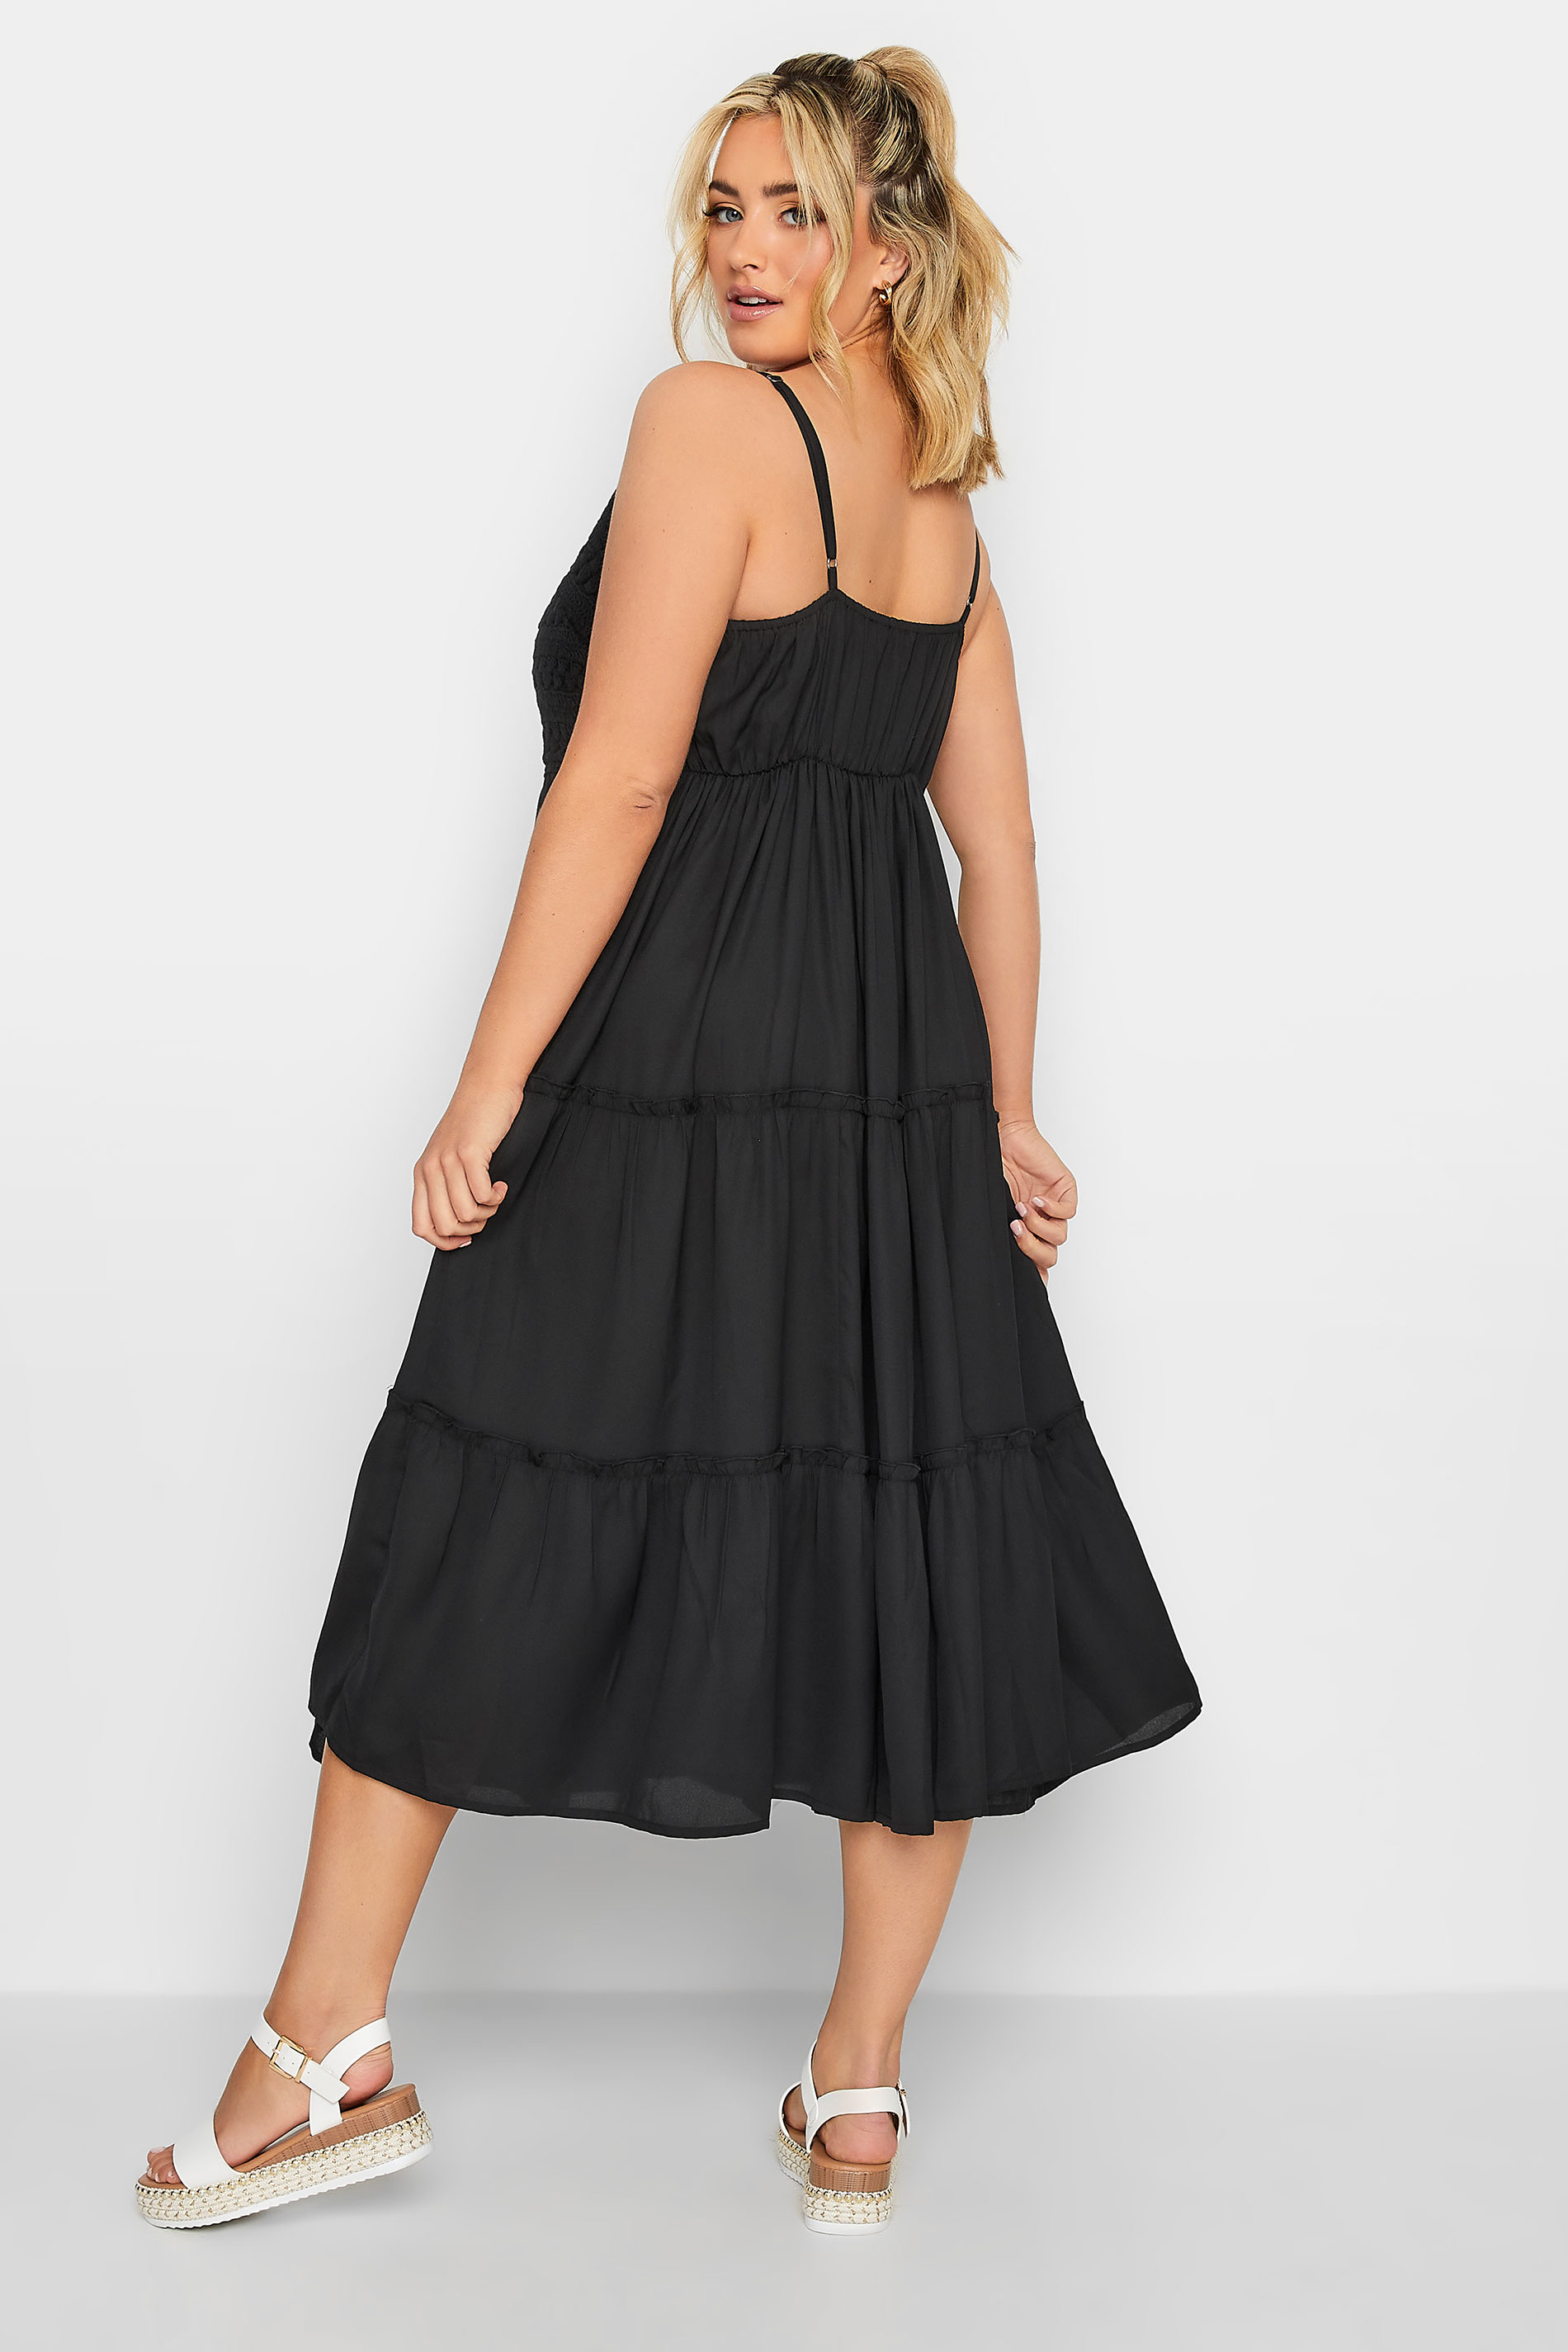 LIMITED COLLECTION Plus Size Black Crochet Tiered Midaxi Dress | Yours Clothing  3